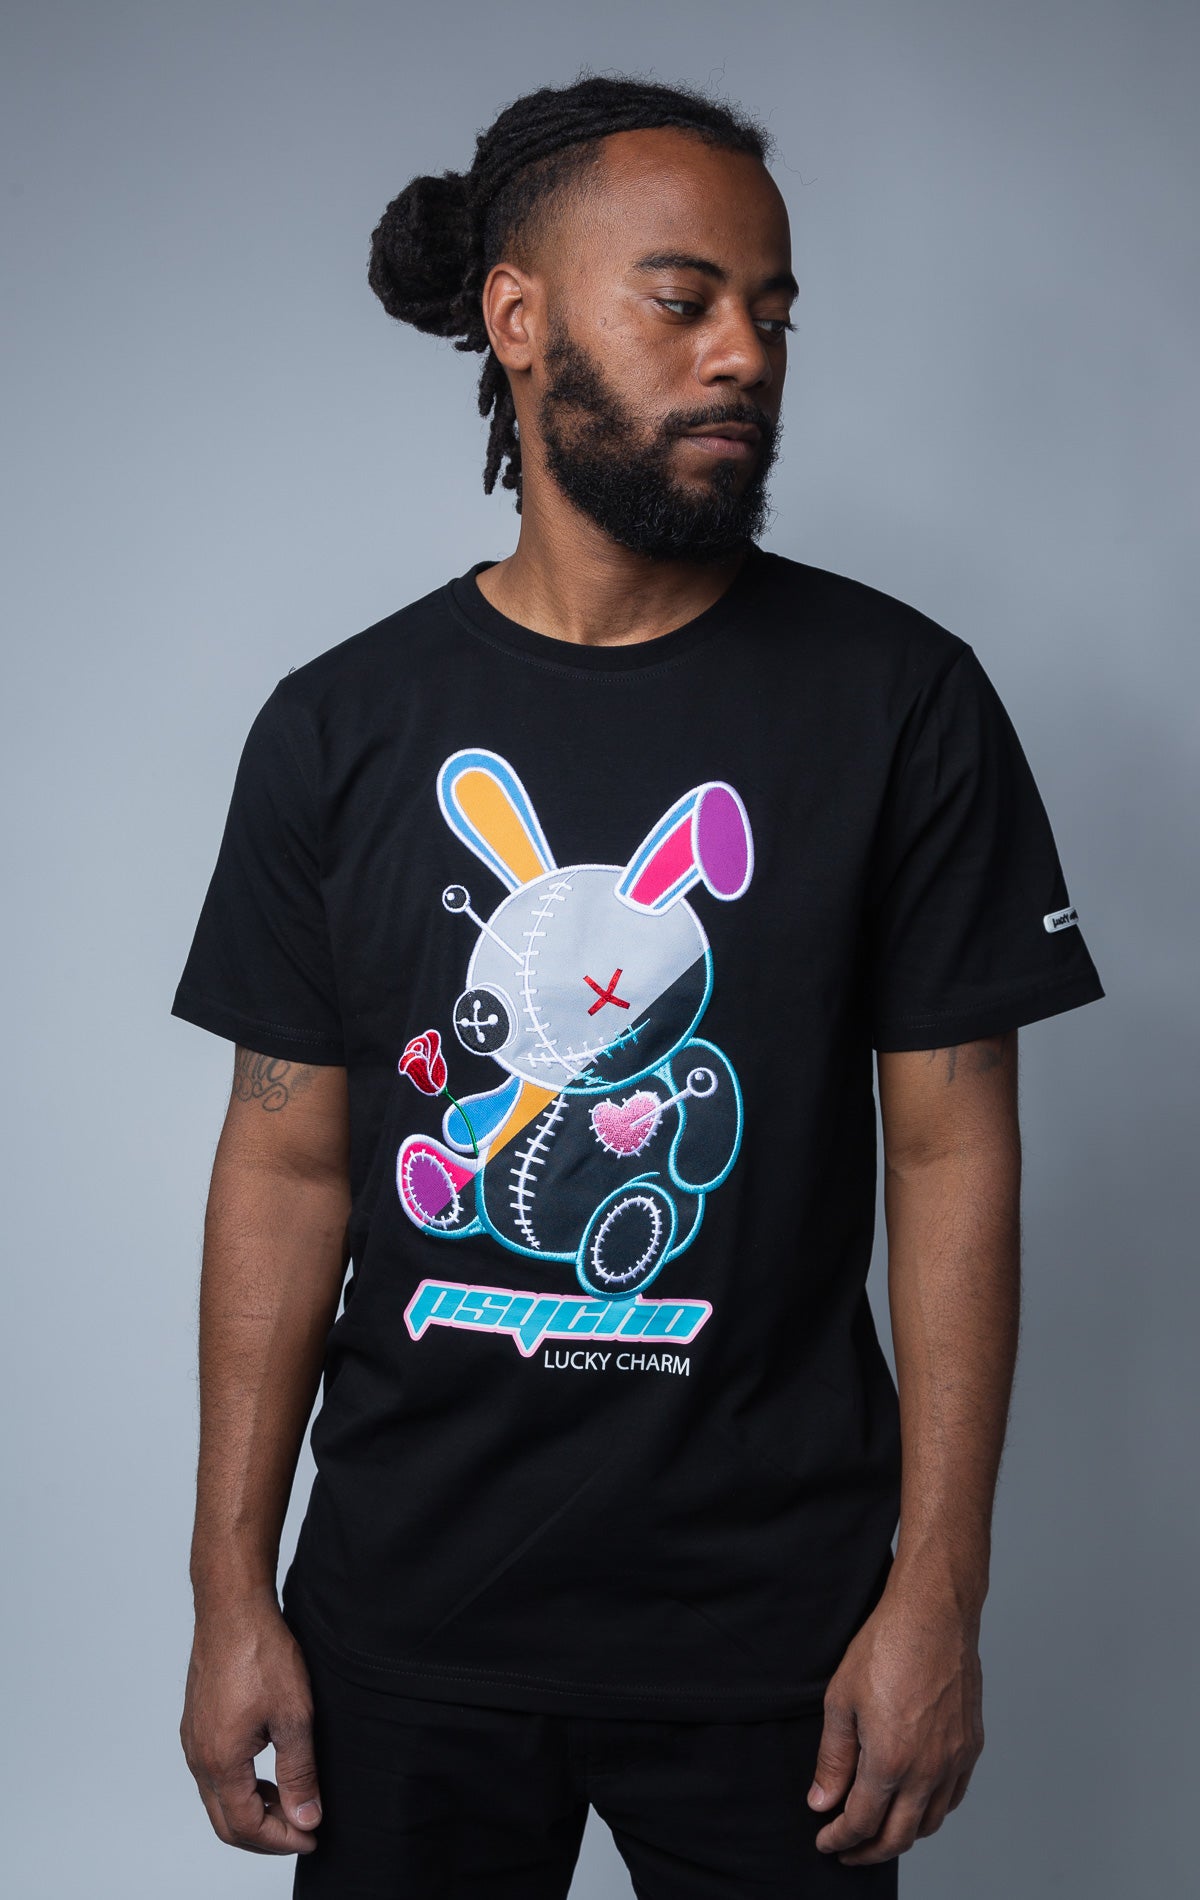 BKYS Luck charm, colorful psycho bunny graphic on black t shirt